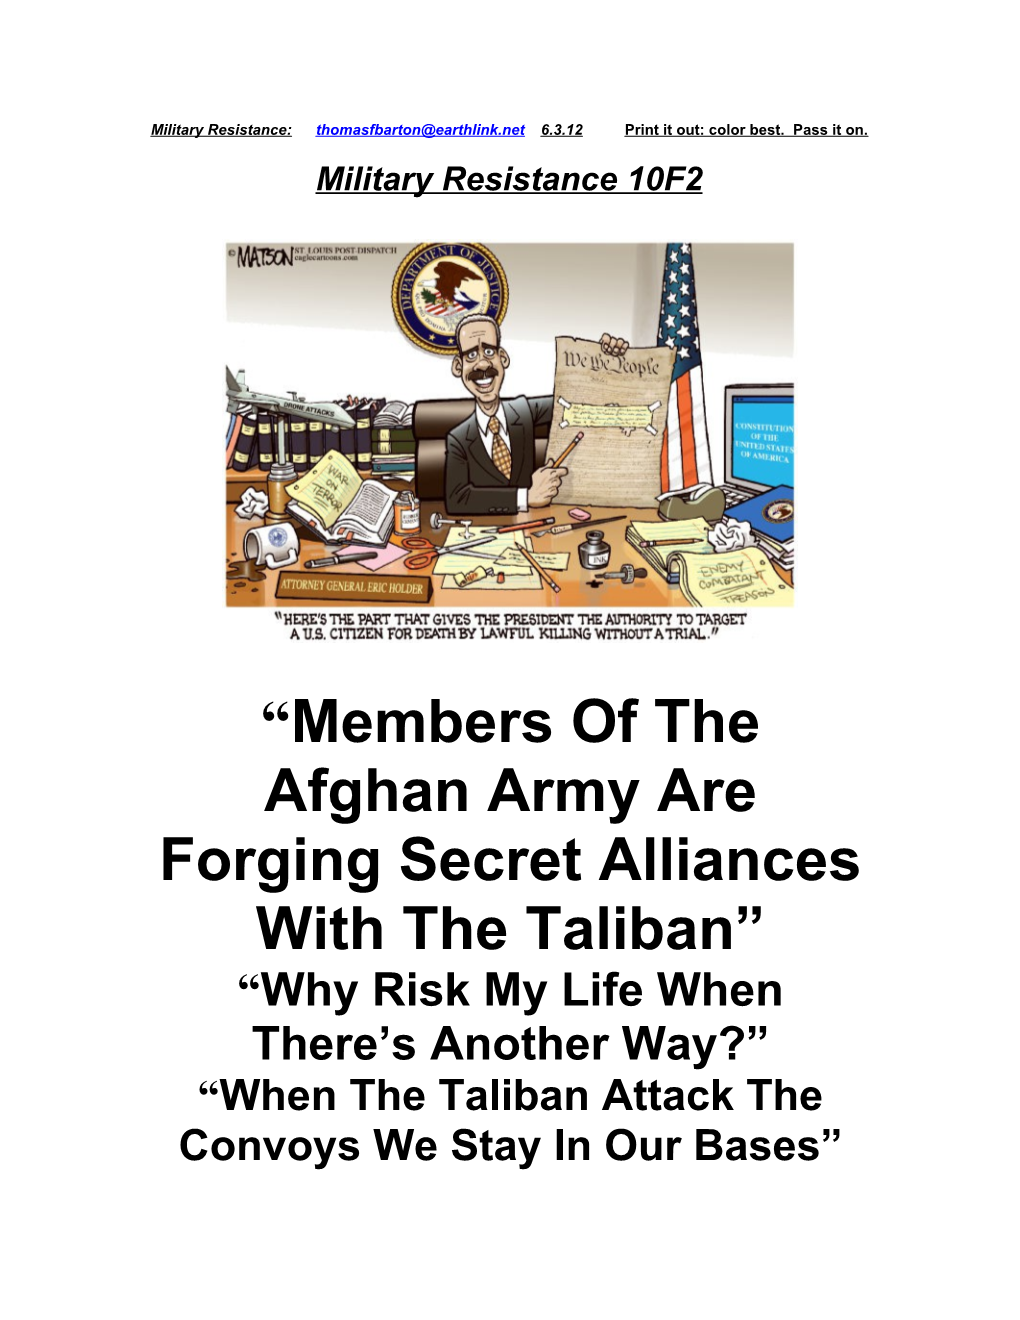 Members of the Afghan Army Are Forging Secret Alliances with the Taliban